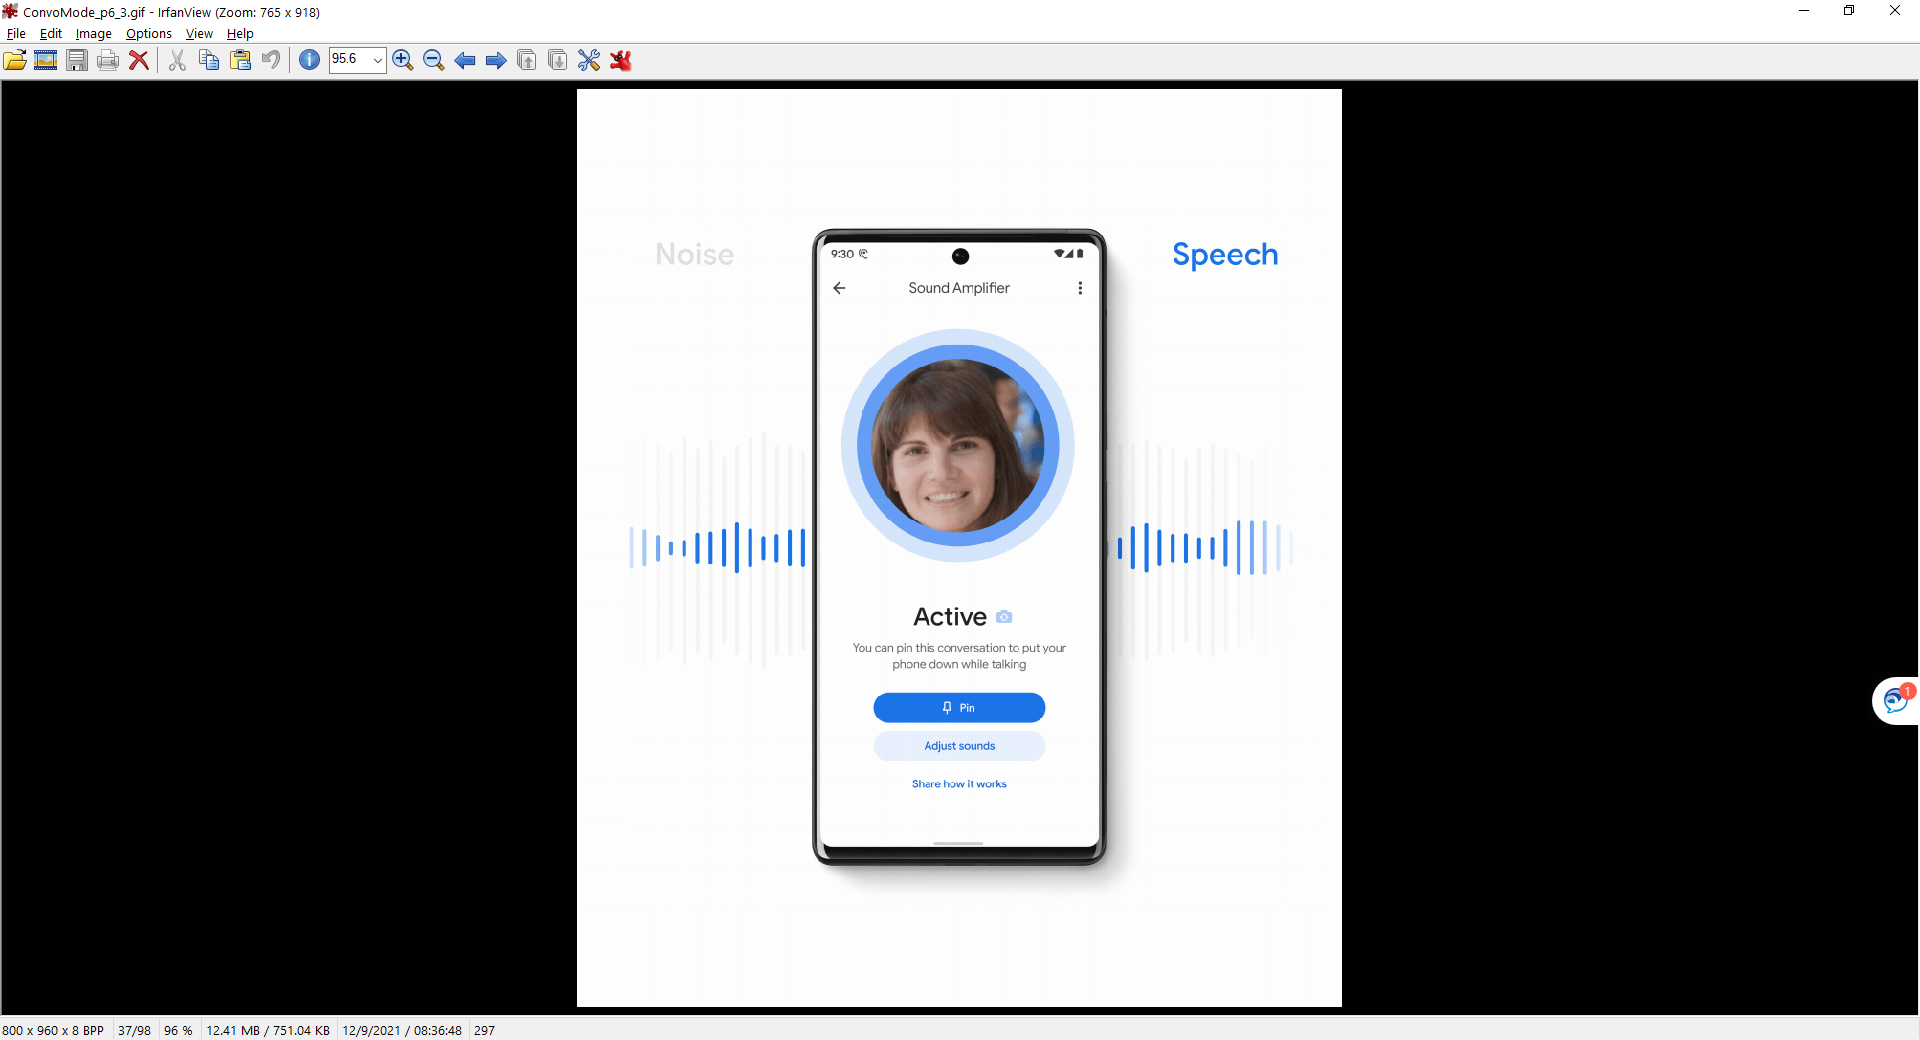 Animated GIF showing how Sound Amplifier works. A person's face is centered in a circle in the middle of the phone and while they speak, abstract sound icons illustrate the app amplifying their words.